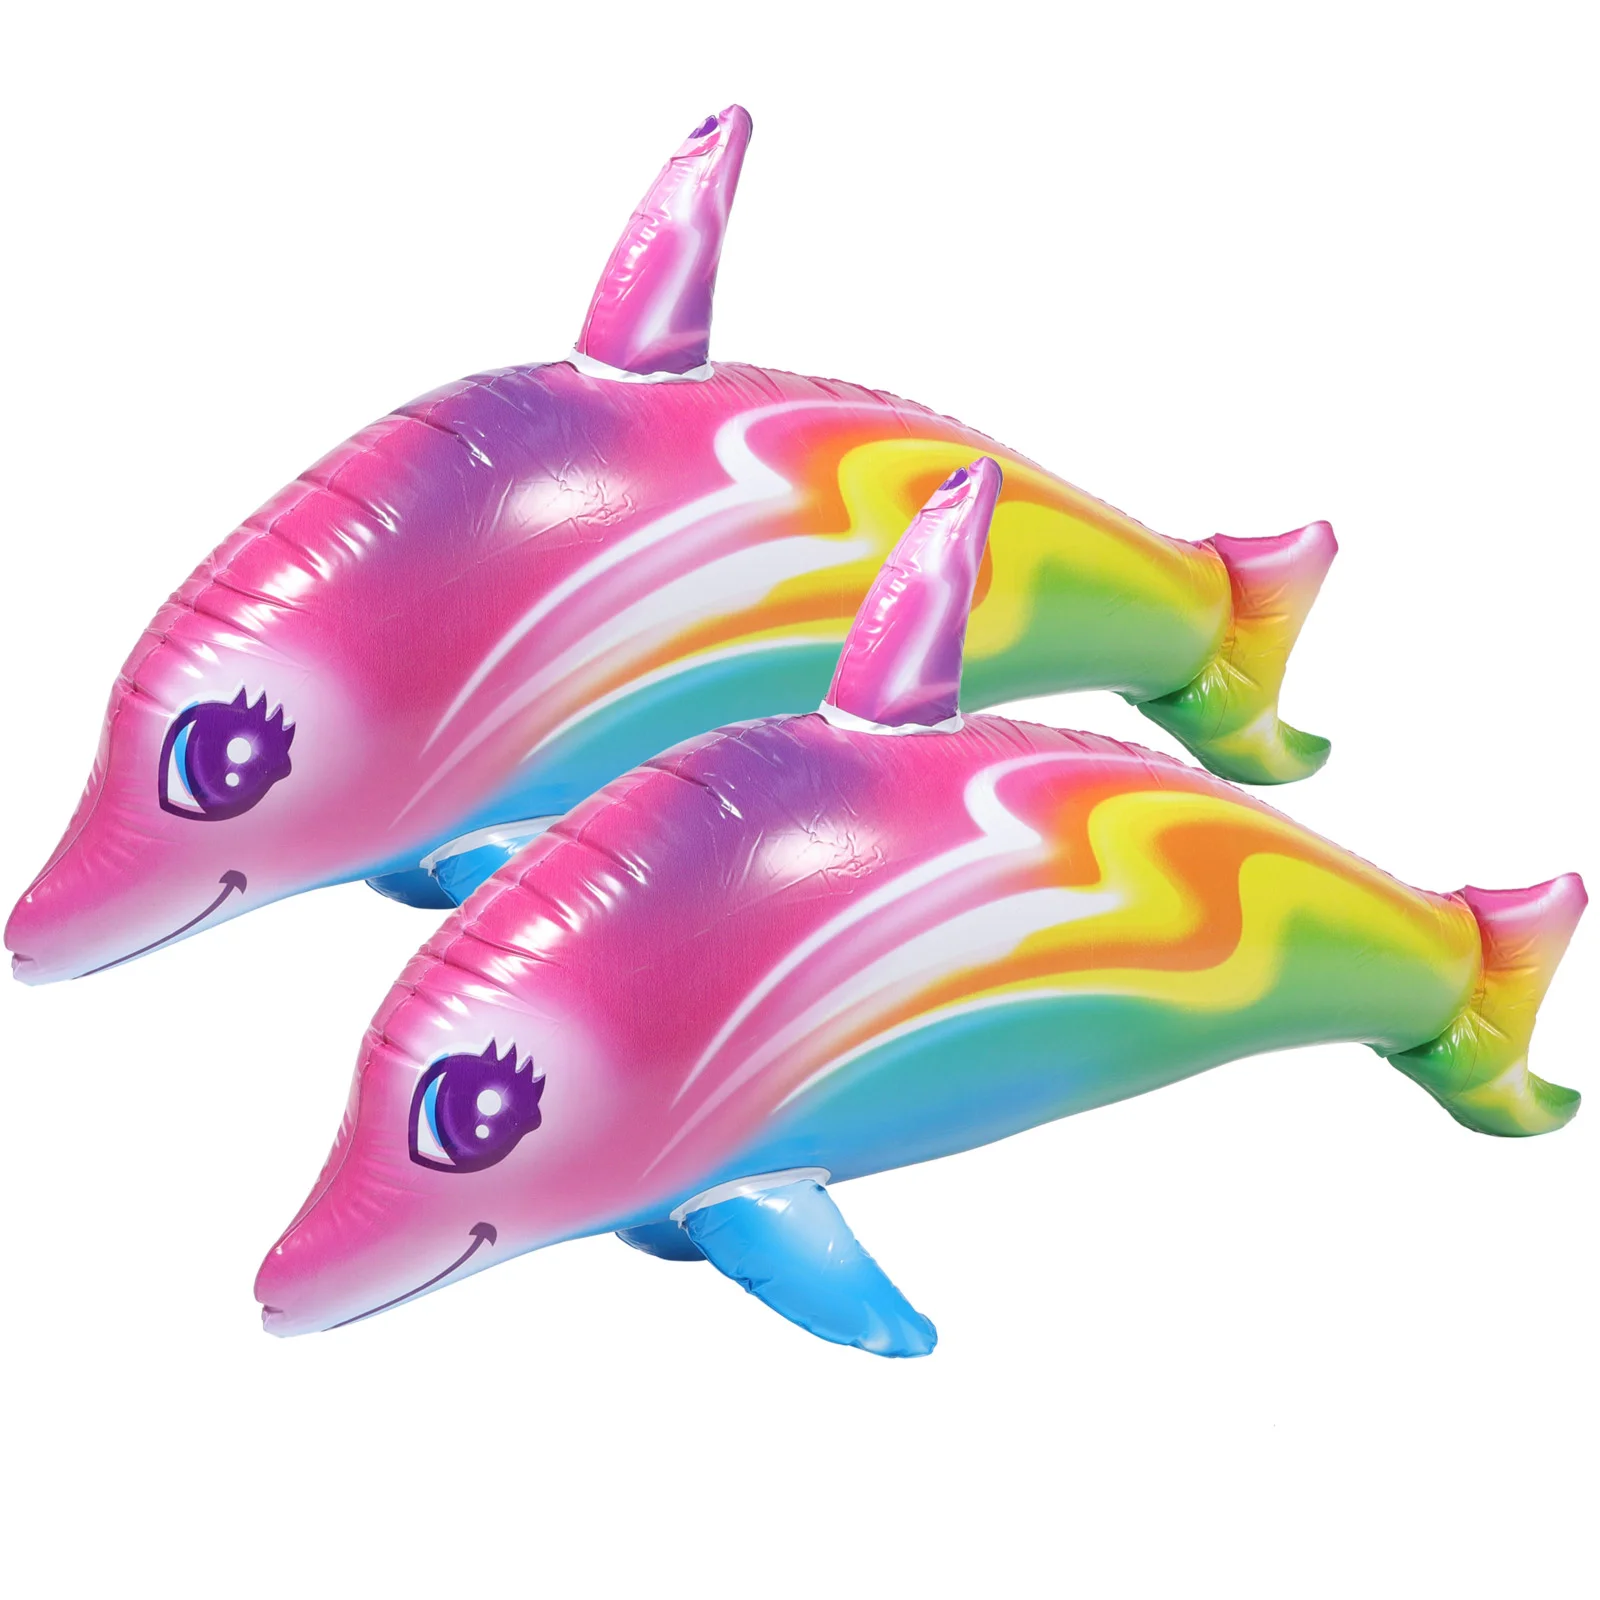 2 Pcs Inflatable Dolphin Toy Beach Game Mermaid Gifts Pool Party Favors Toys - $15.93